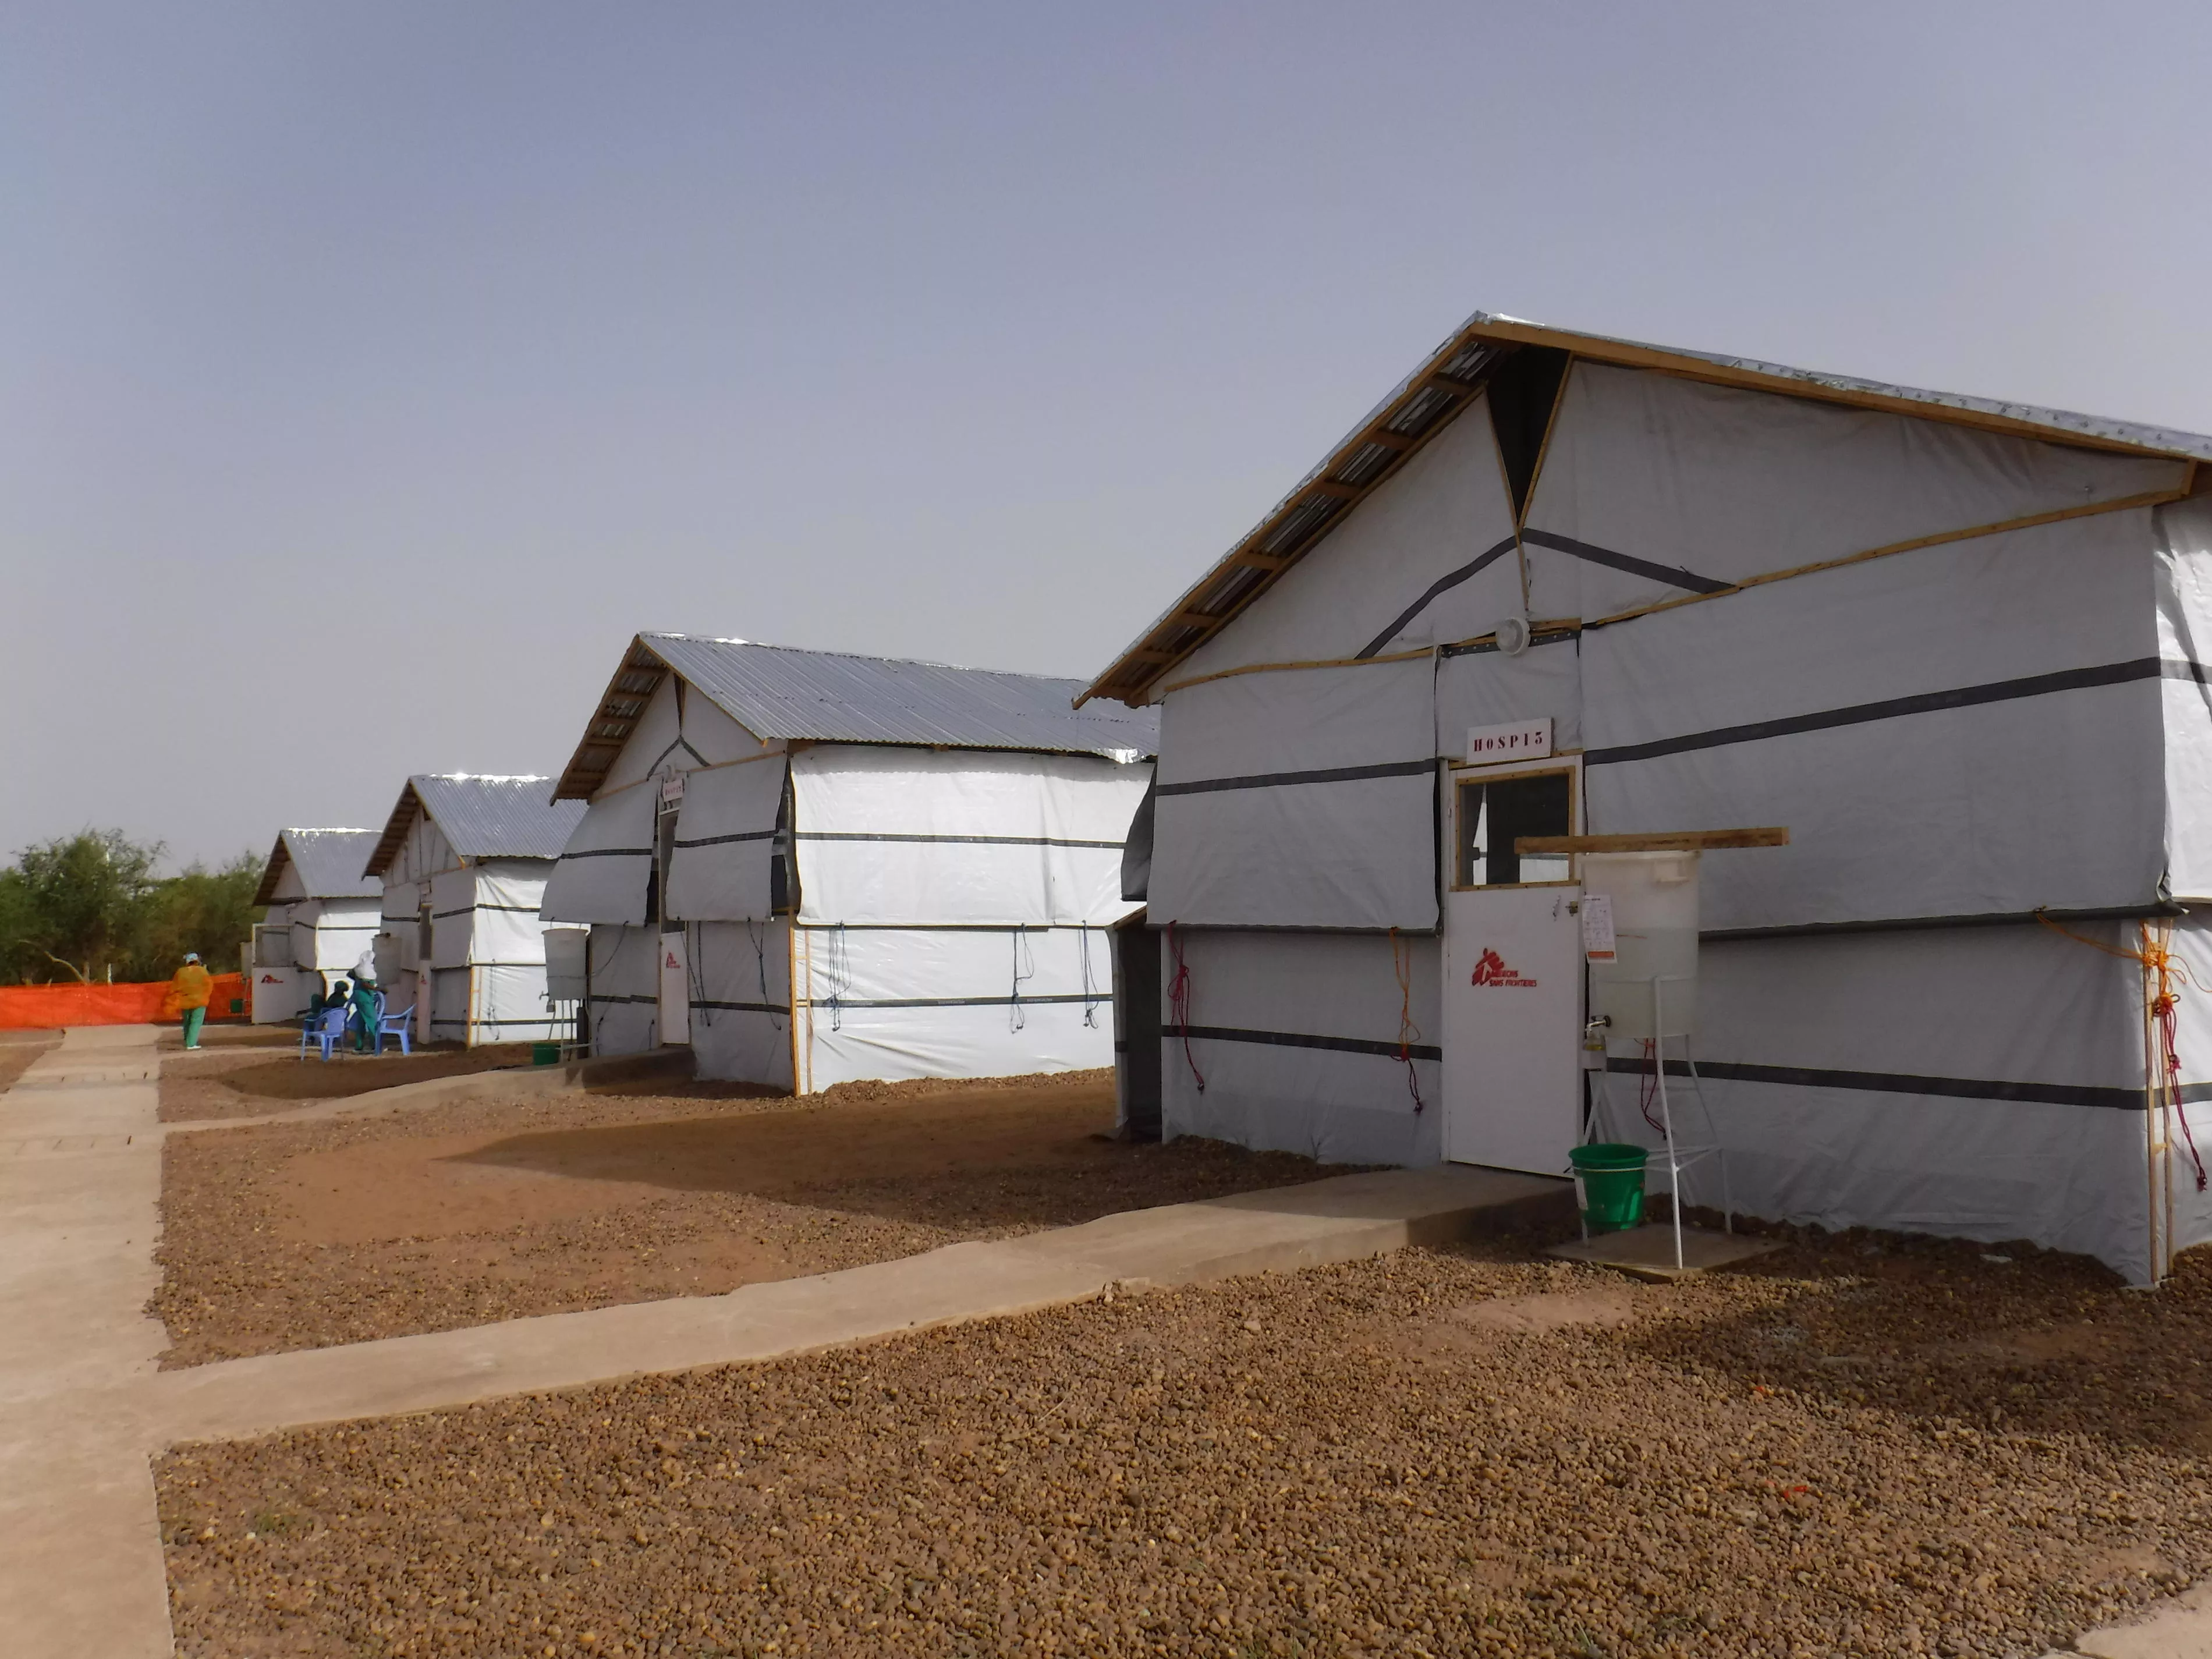 The MSF treatment centre for COVID-19 patients at the Amirou Boubacar Diallo National Hospital in Niamey, Niger, has 50 beds, with the potential to accommodate up to 100 beds in case of a peak in patient numbers.